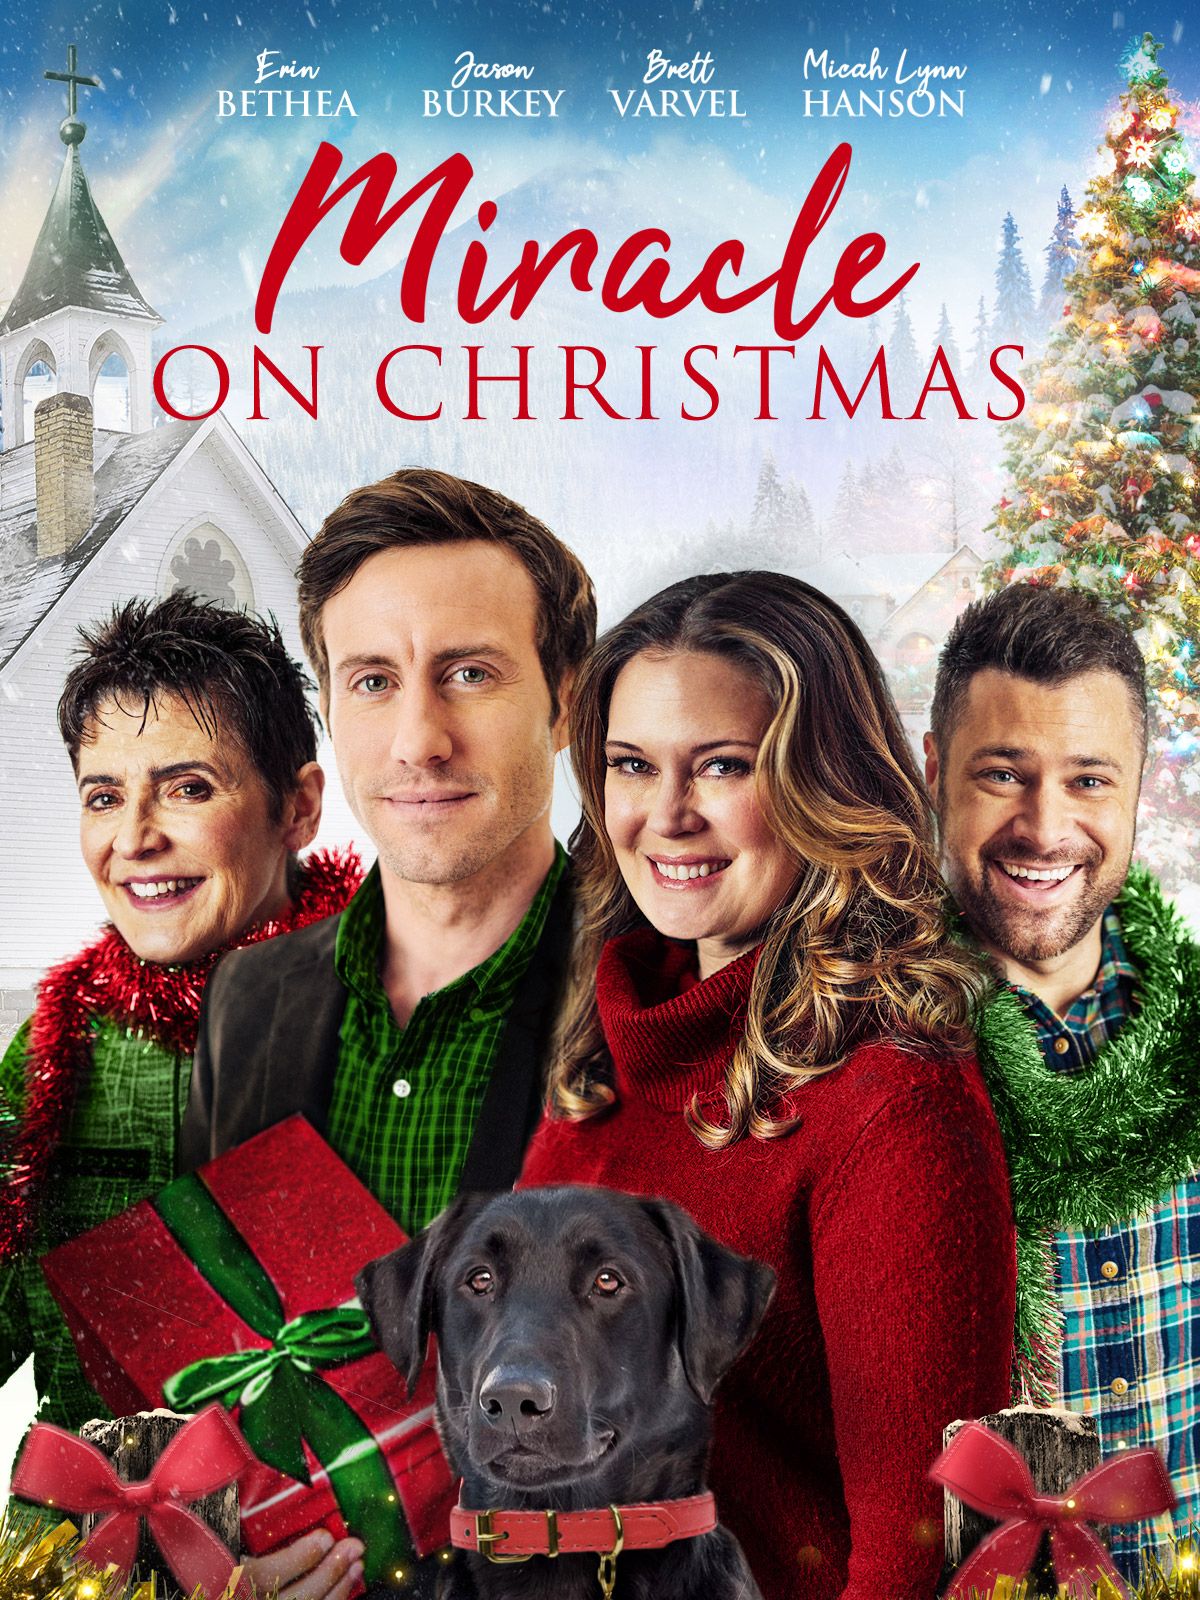 Keyart for the movie Miracle on Christmas